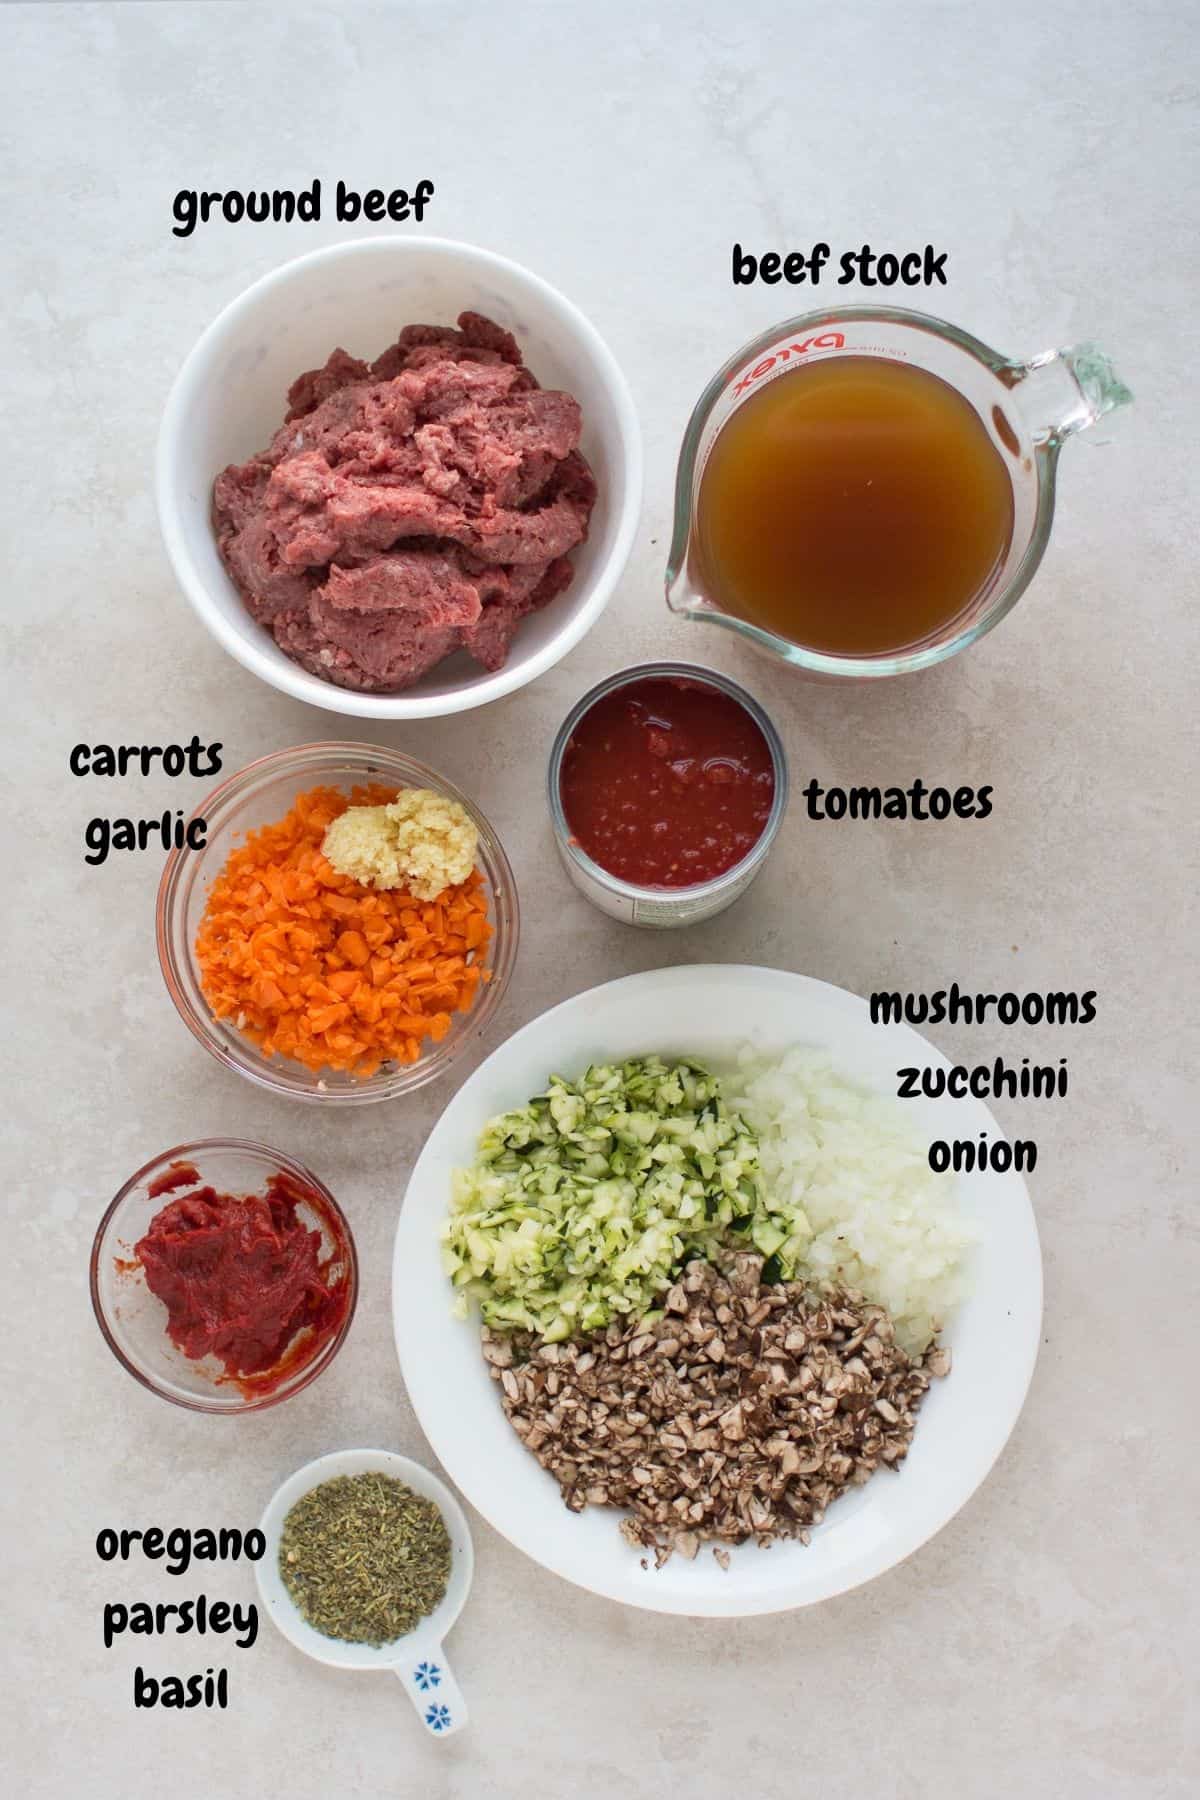 All the ingredients laid out on a white backgroound.